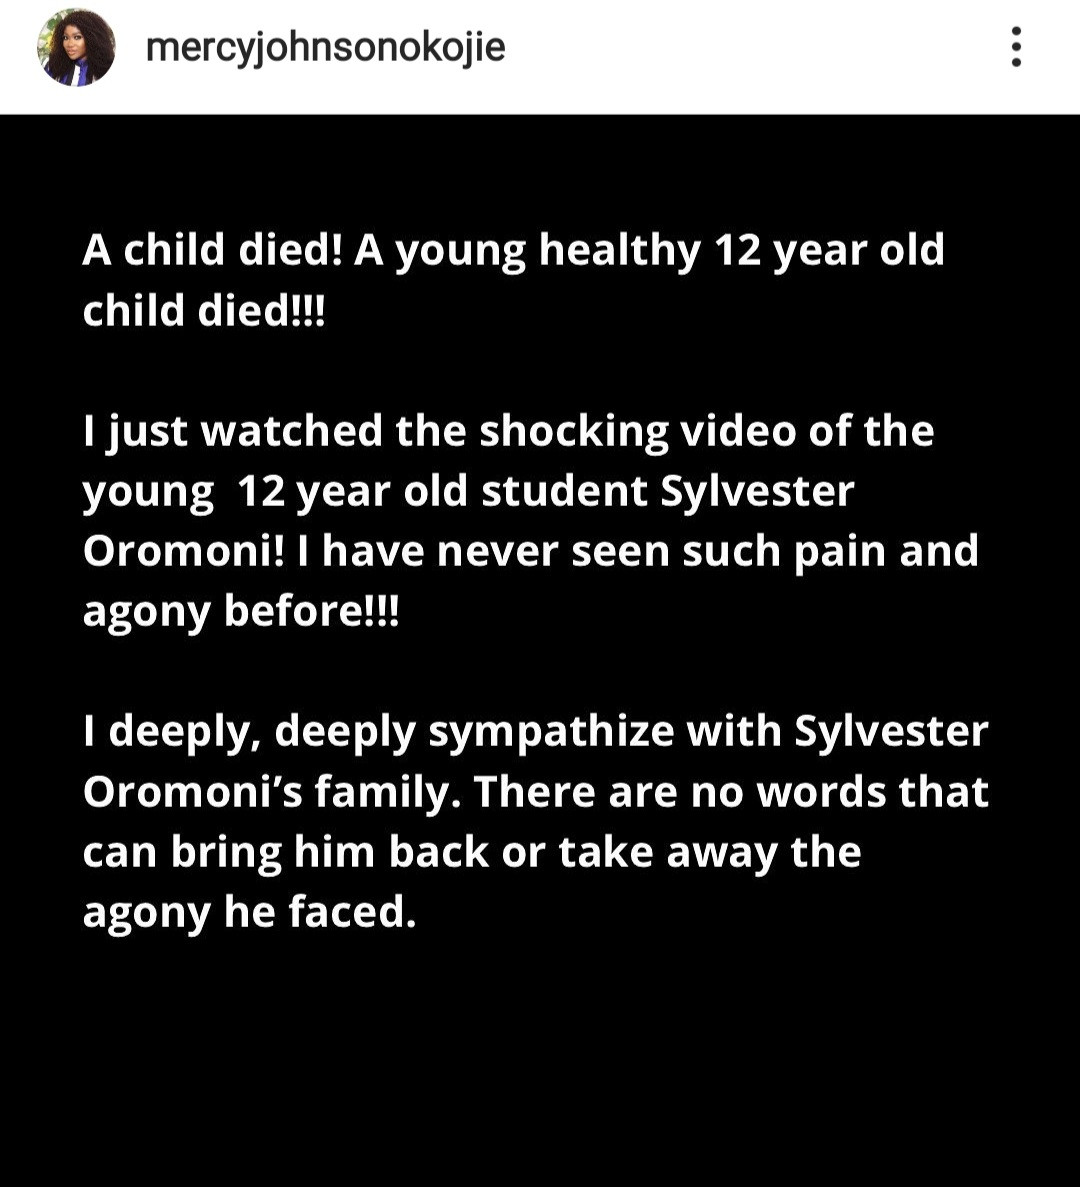 Mercy Johnson, Princess,  Lepacious Bose, Jaywon and other celebrities demand justice for Sylvester Oromini and accountability from the school involved 